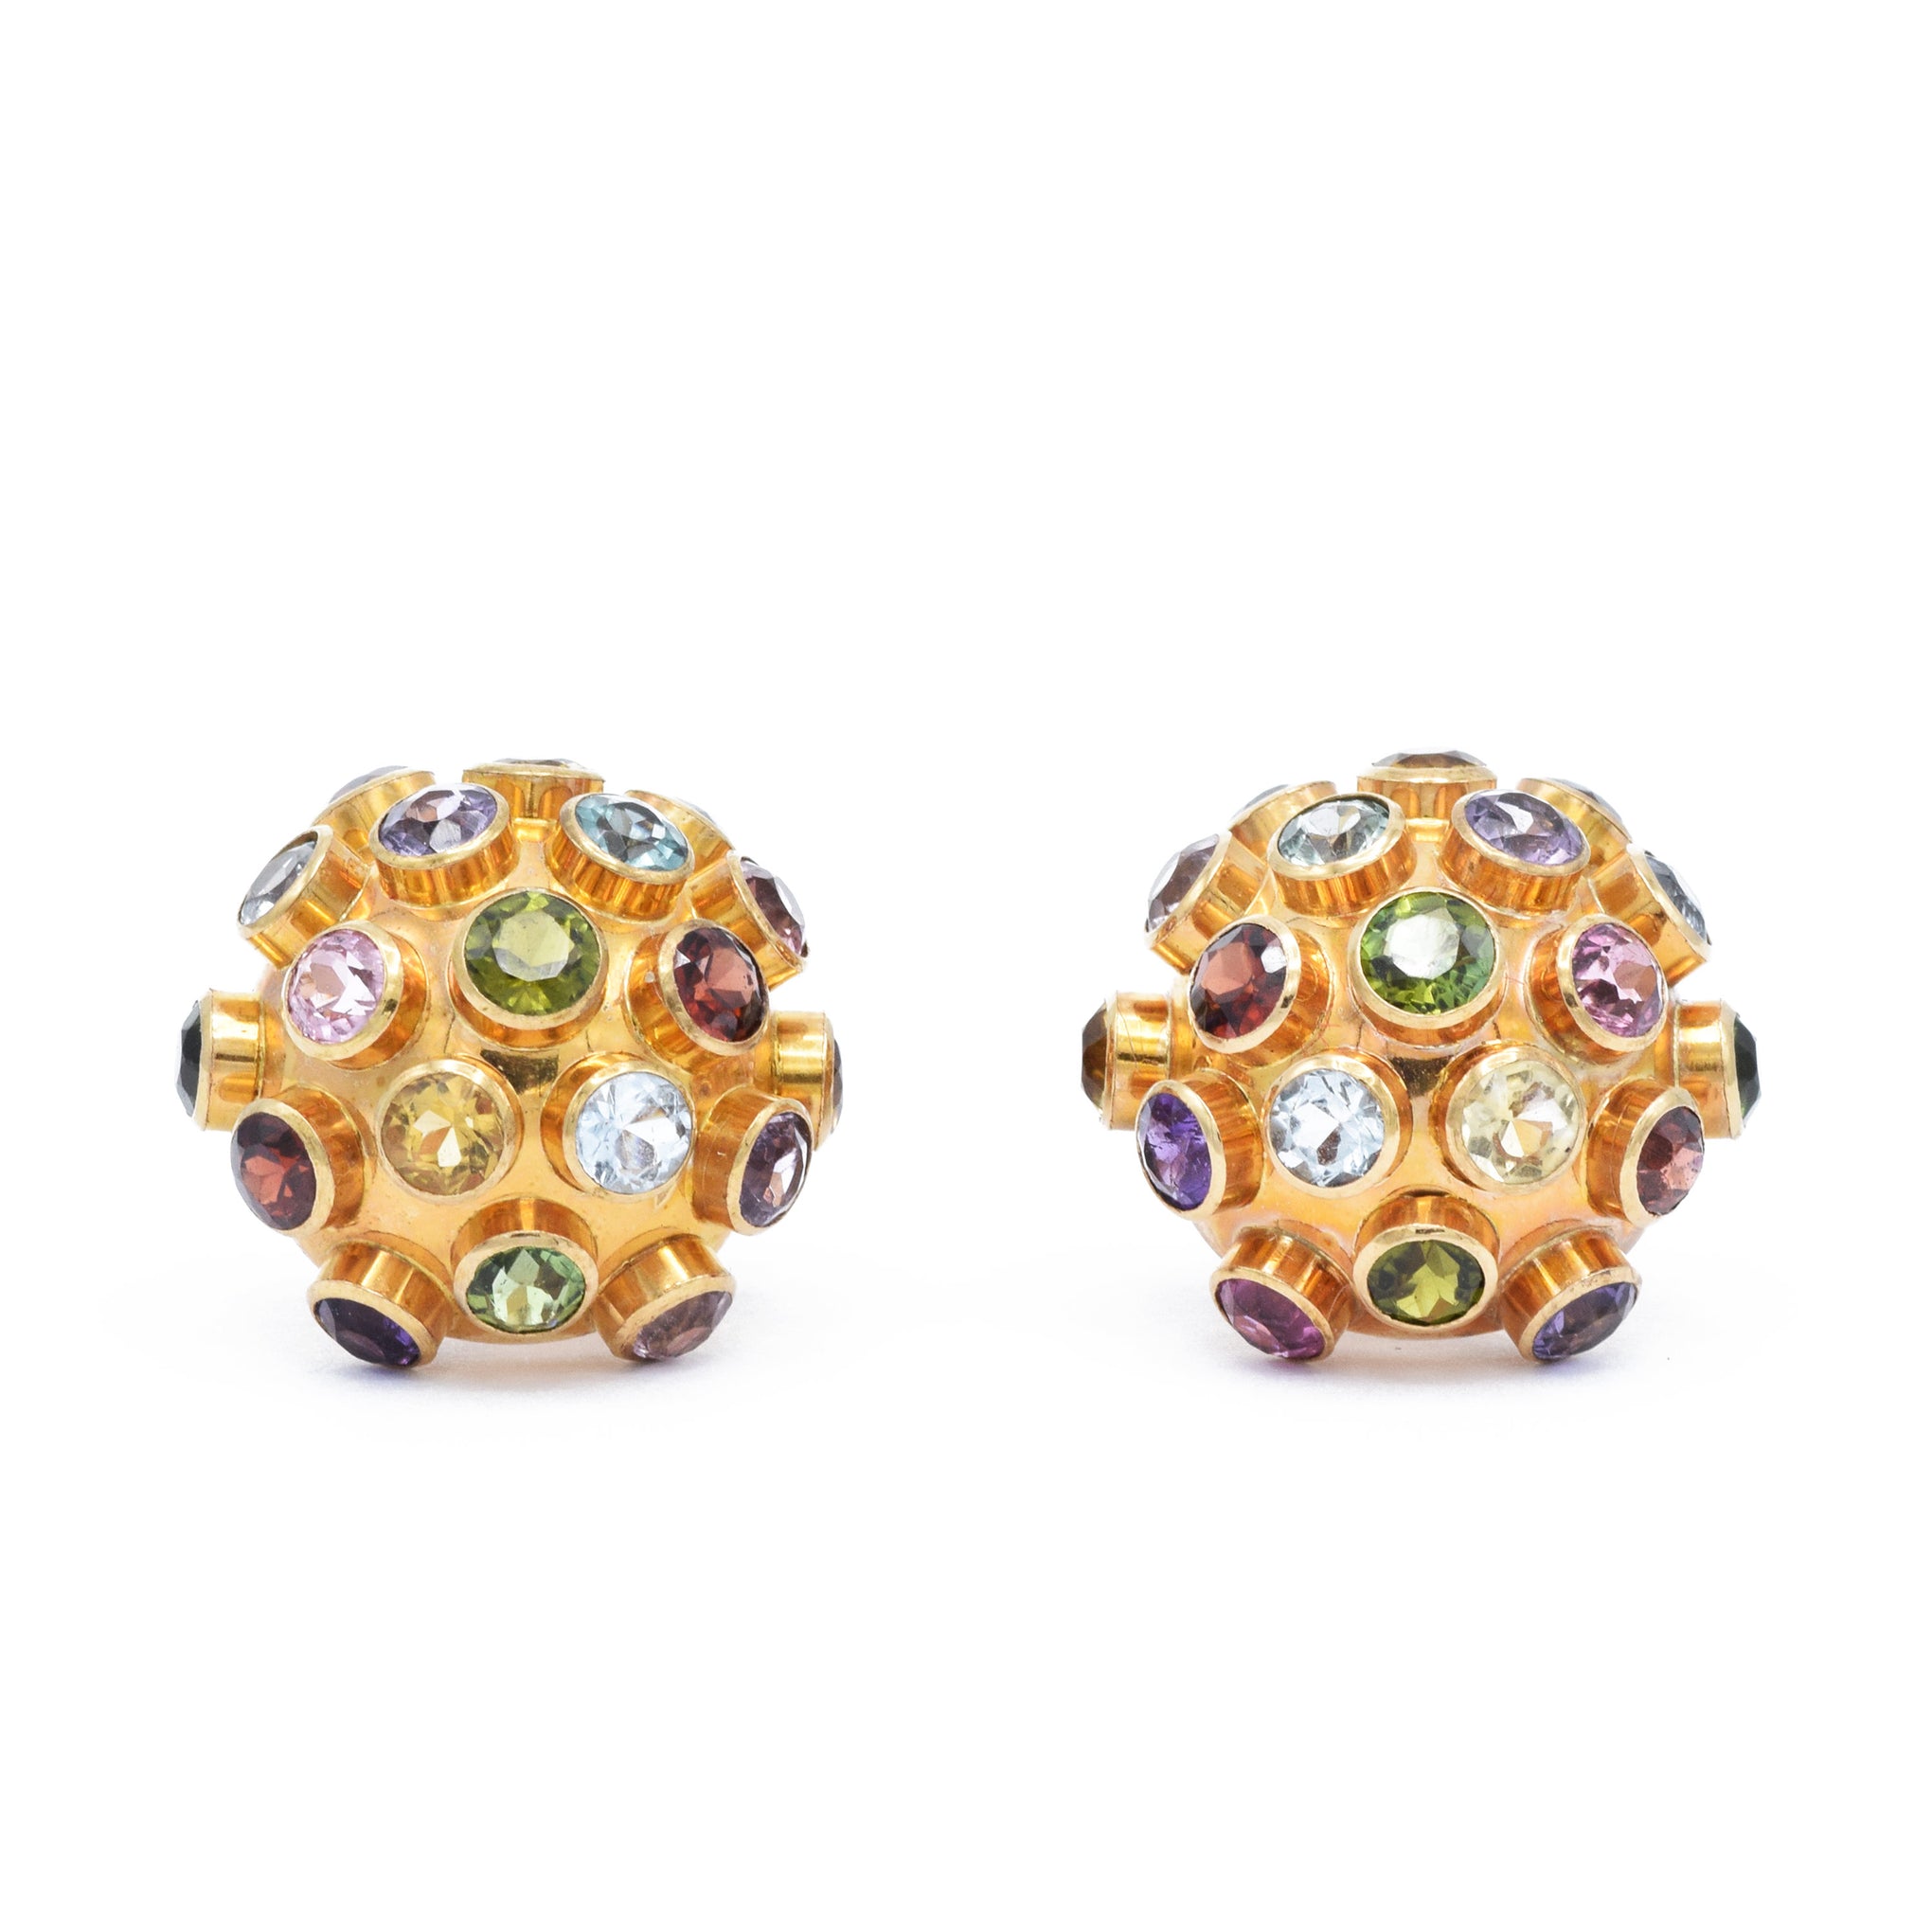 Vintage Multi-Colored Stone Dome Earrings